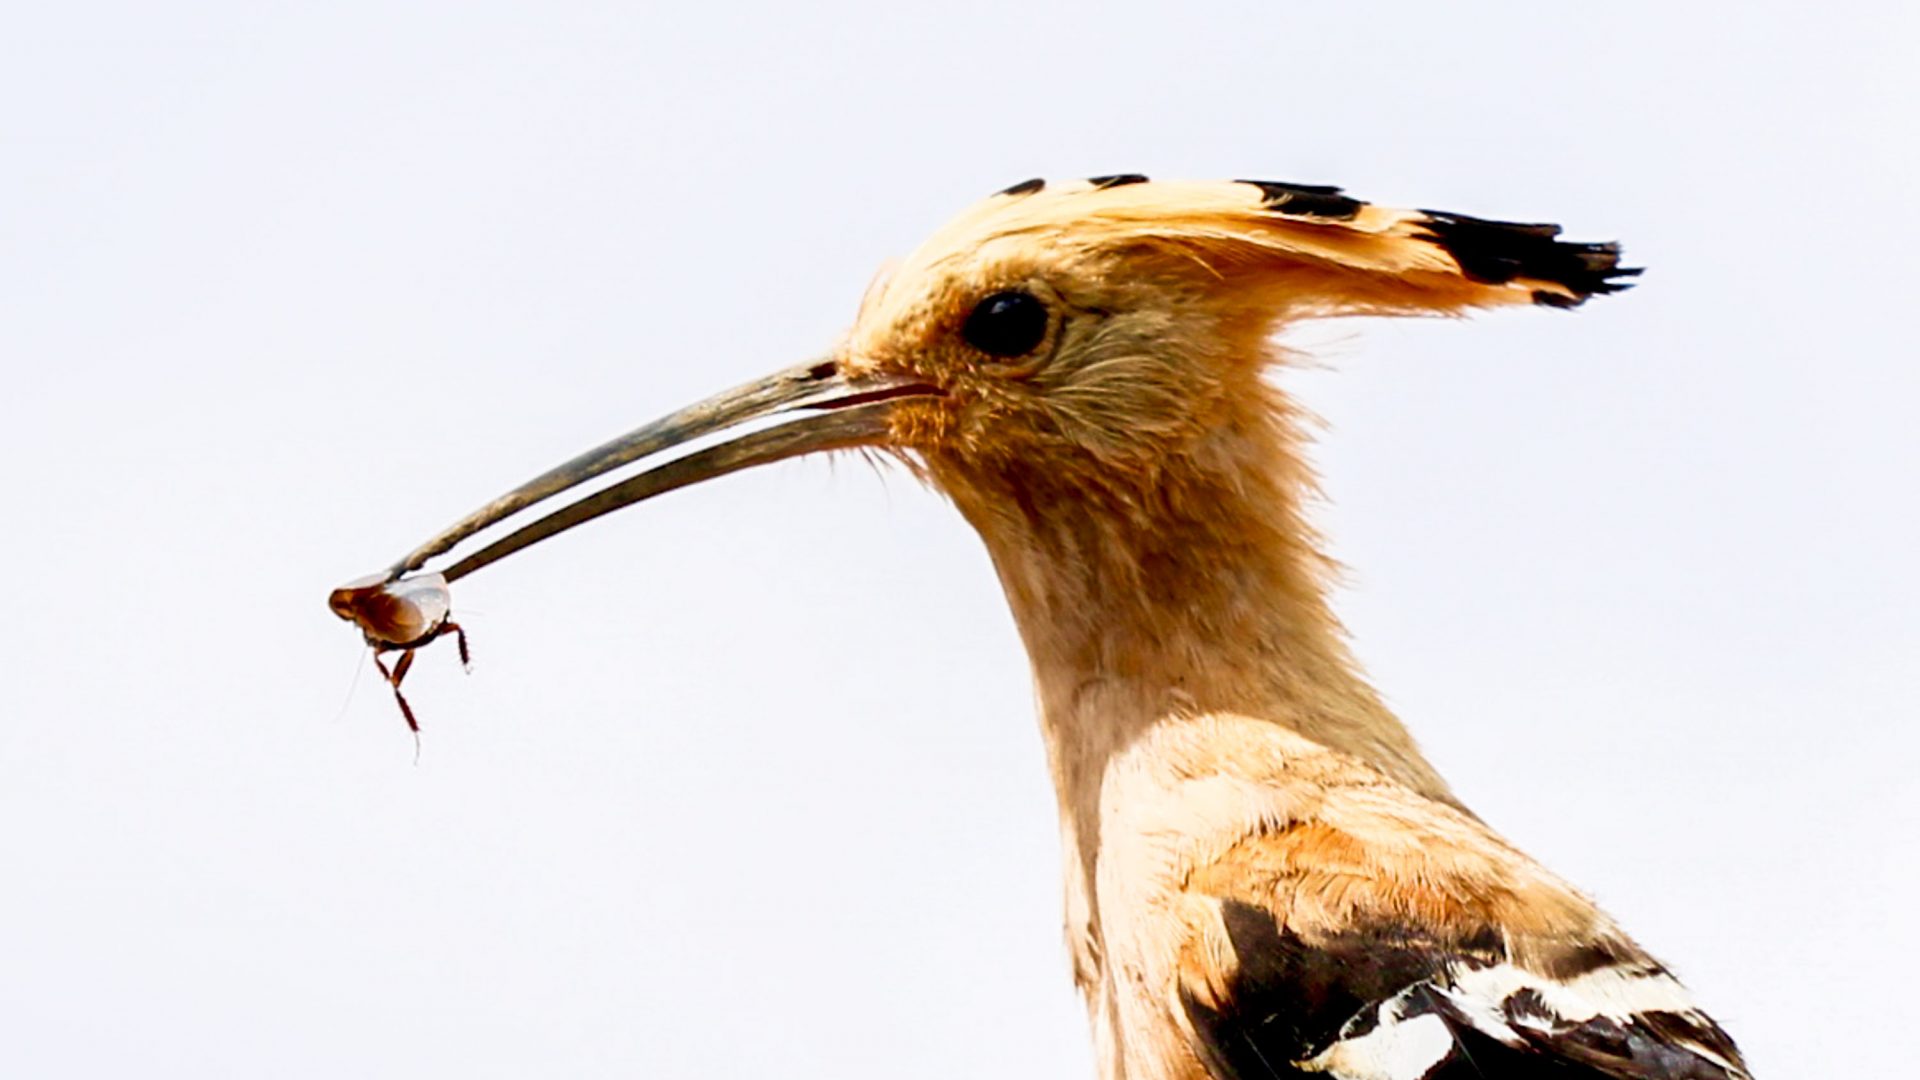 Colorful hoopoes live across Afro-Eurasia, and are known for their 'crown' of feathers.